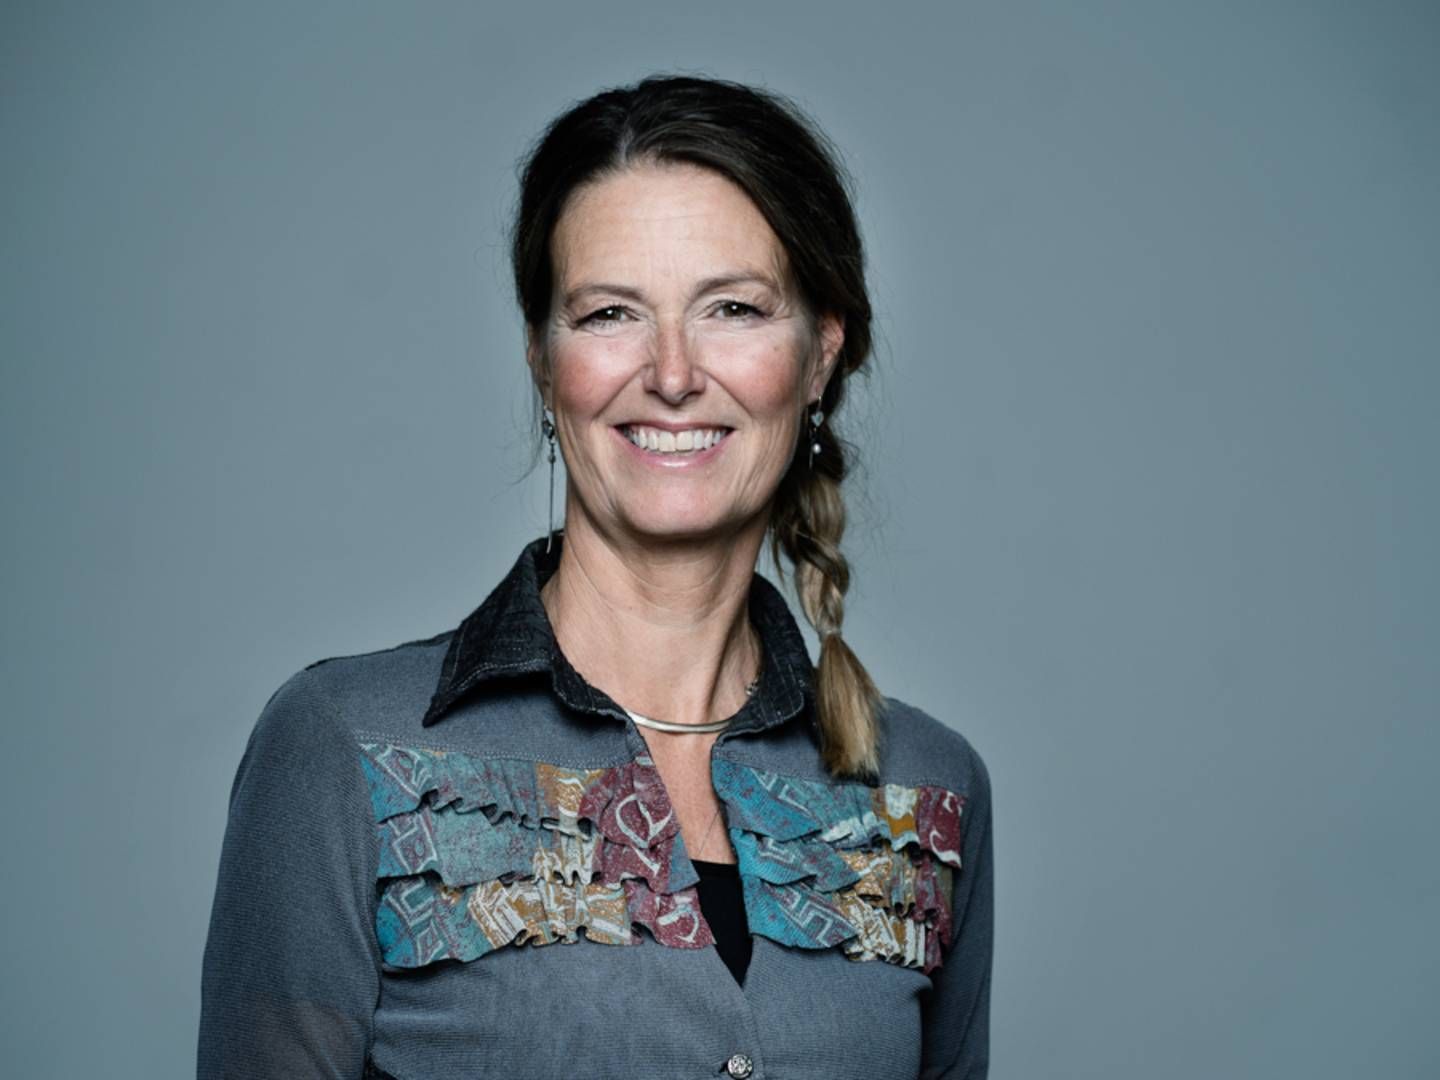 Charlotte Dyring, newly appointed CEO of Pincer Biotech | Photo: Privat / Charlotte Dyring